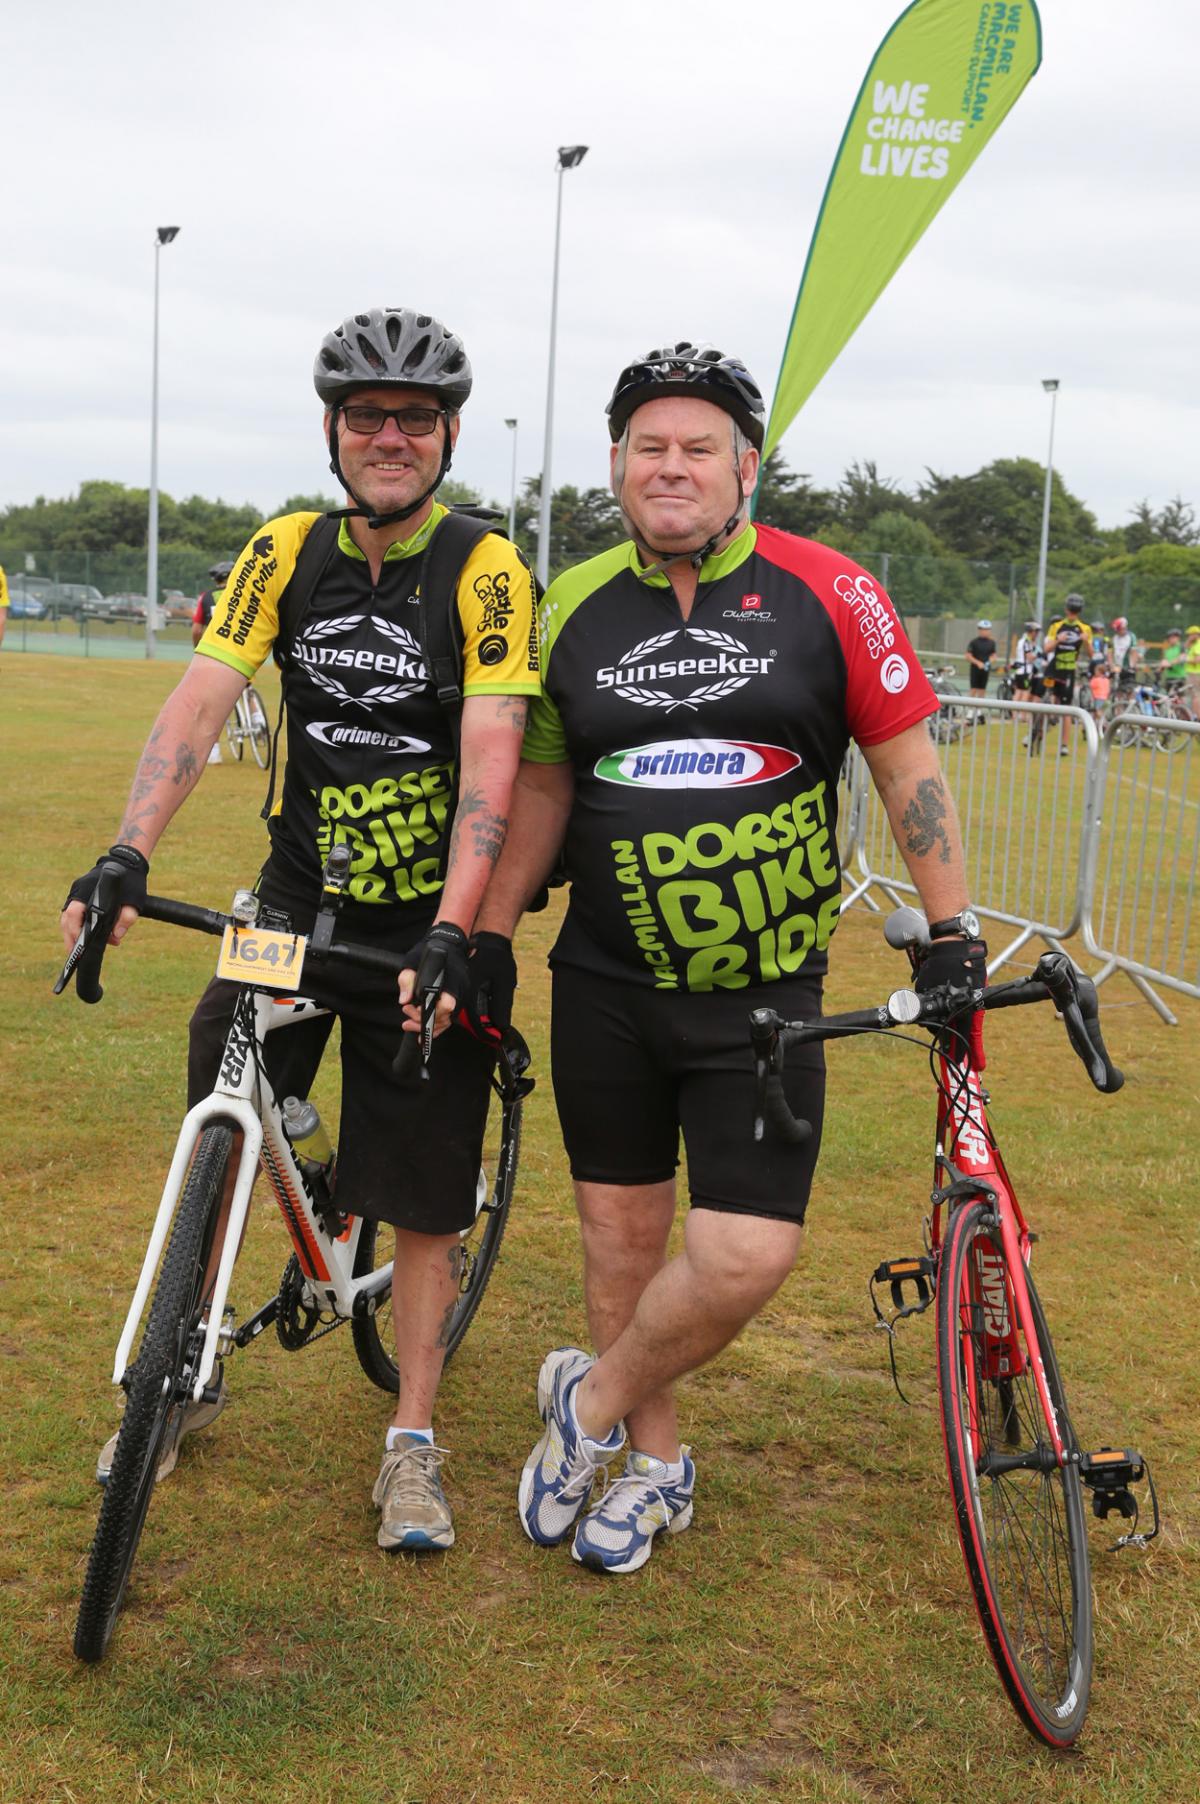 All our pictures of the Macmillan Dorset Bike Ride 2015